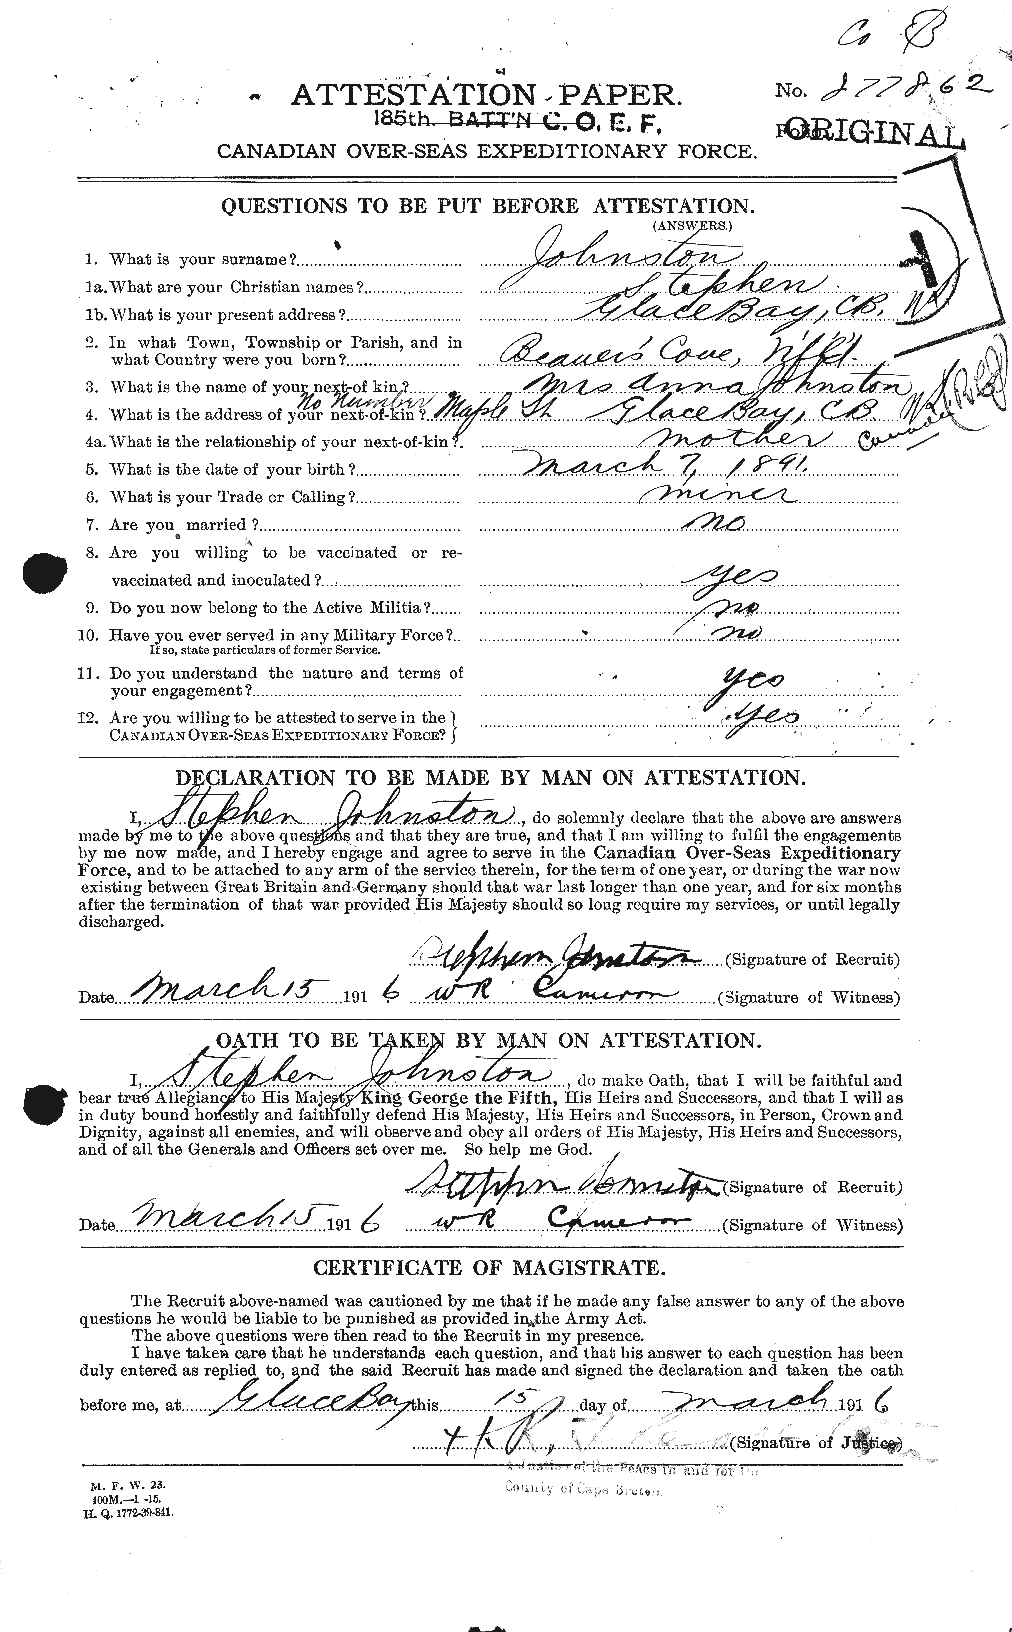 Personnel Records of the First World War - CEF 427109a